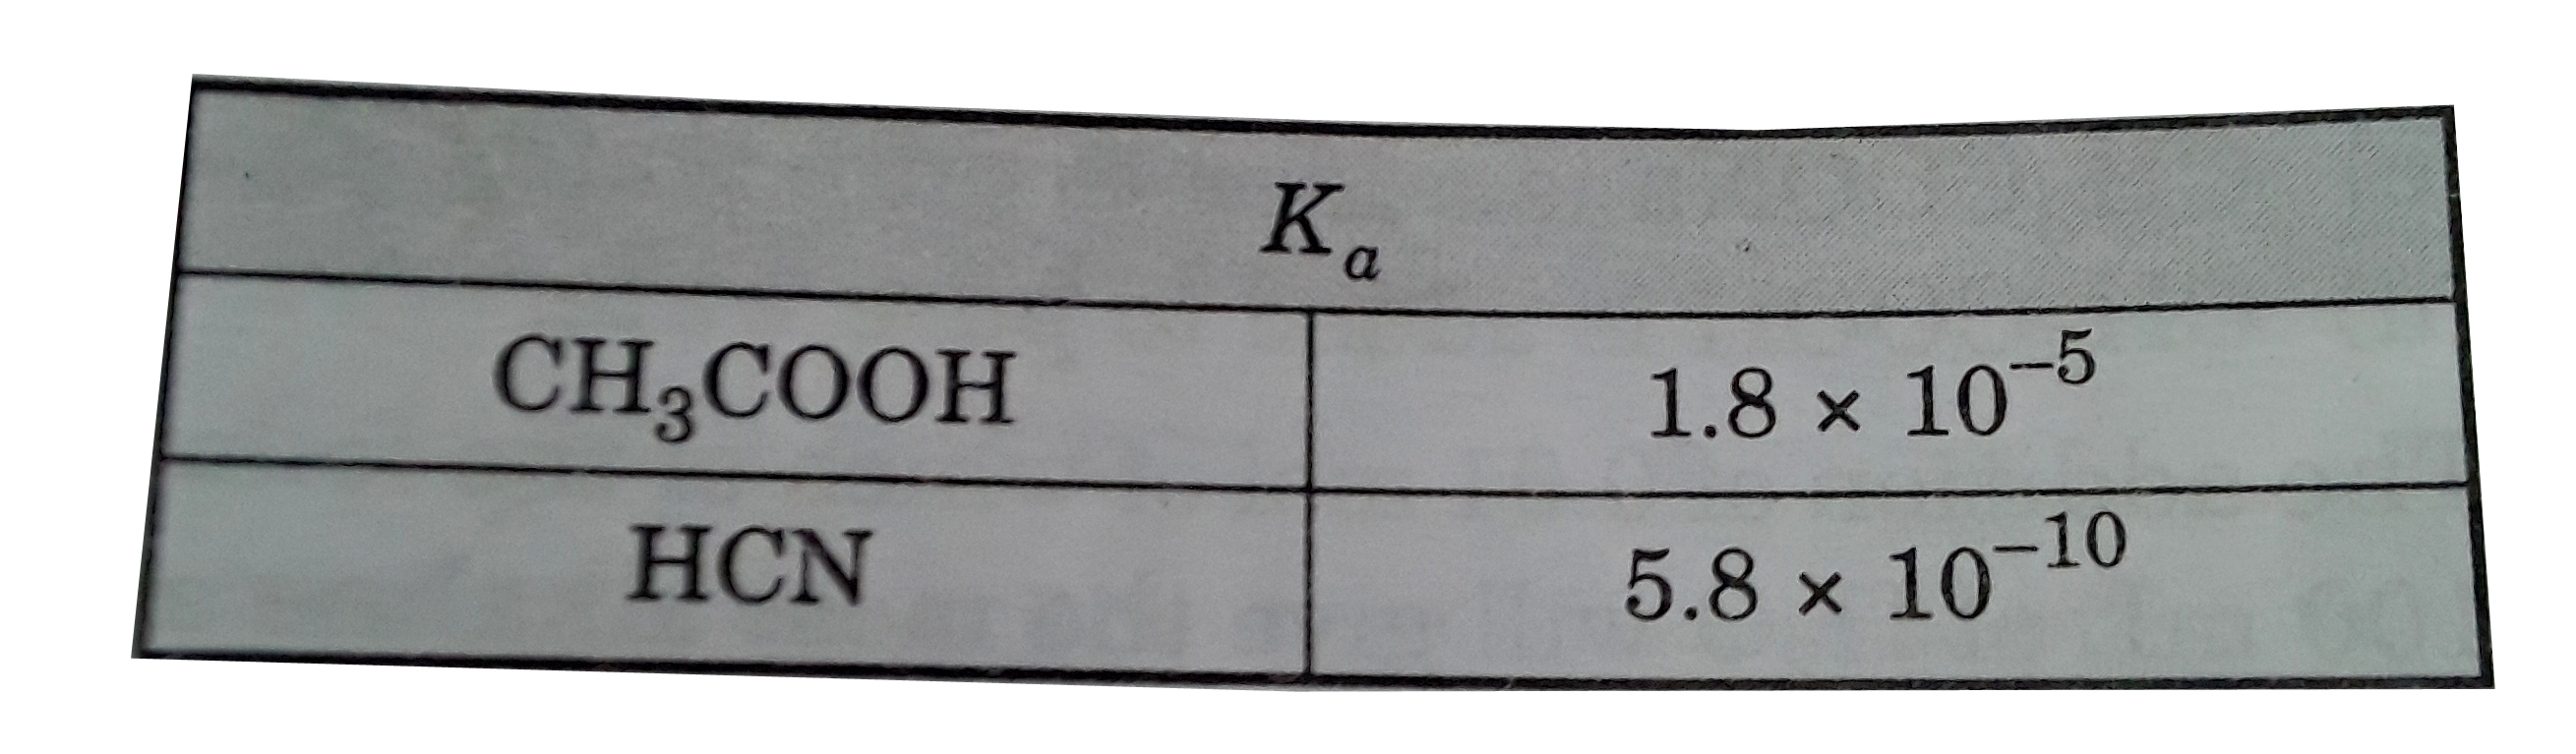 Which solution has the highest pH ?